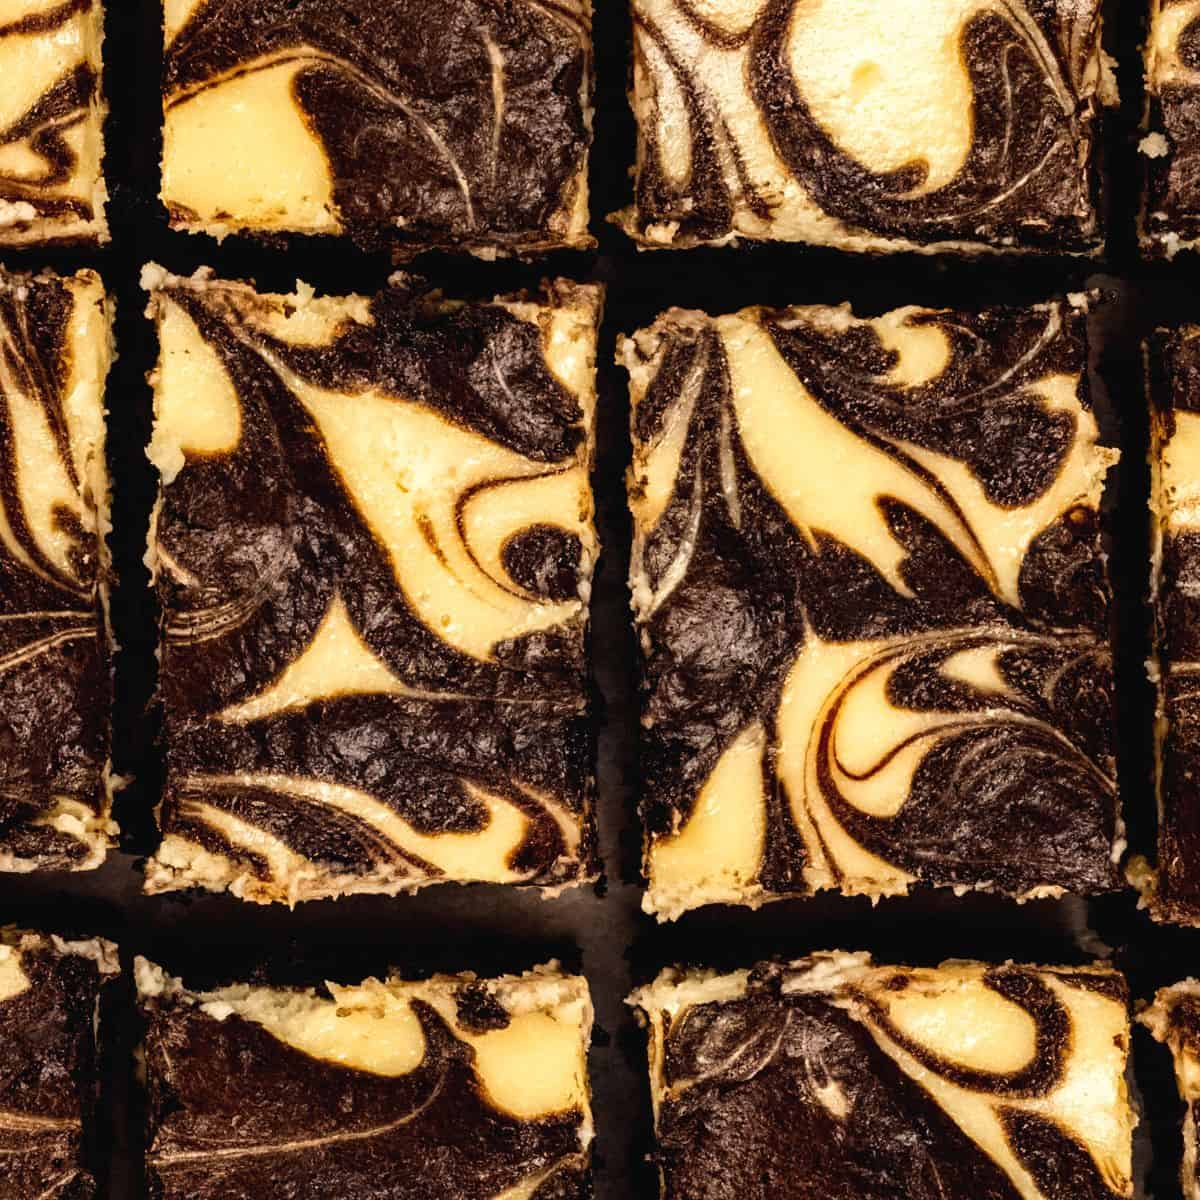 Looking down on an up close view of gluten free cheesecake brownies that have been cut into rectangles. The cheesecake and brownie batter have swirled together.